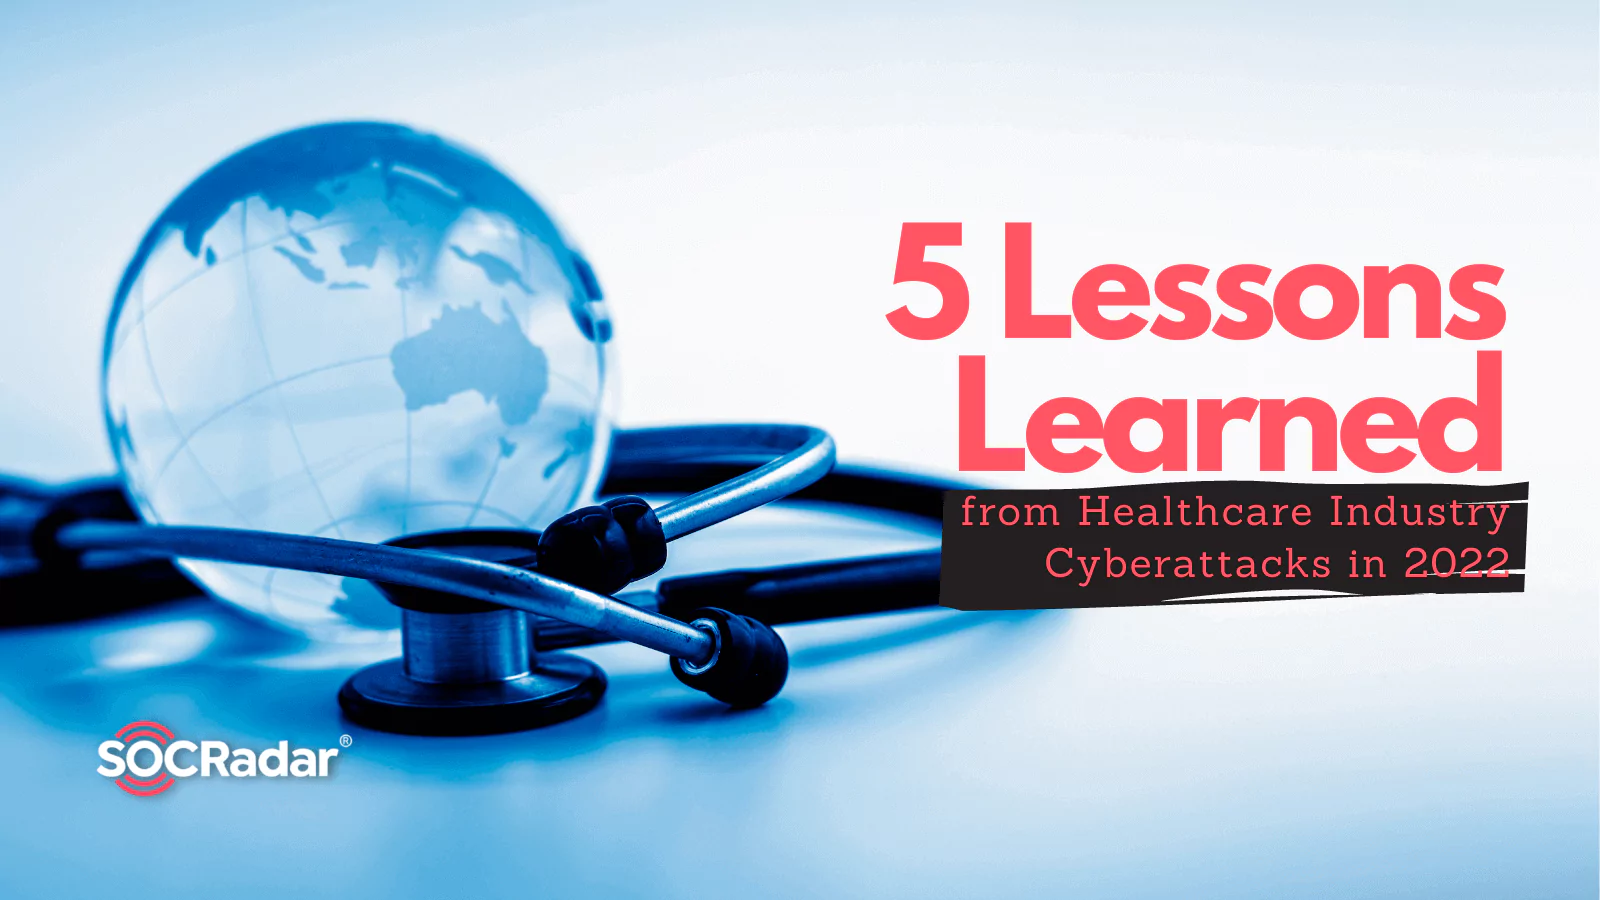 SOCRadar® Cyber Intelligence Inc. | 5 Lessons Learned from Healthcare Industry Cyberattacks in 2022